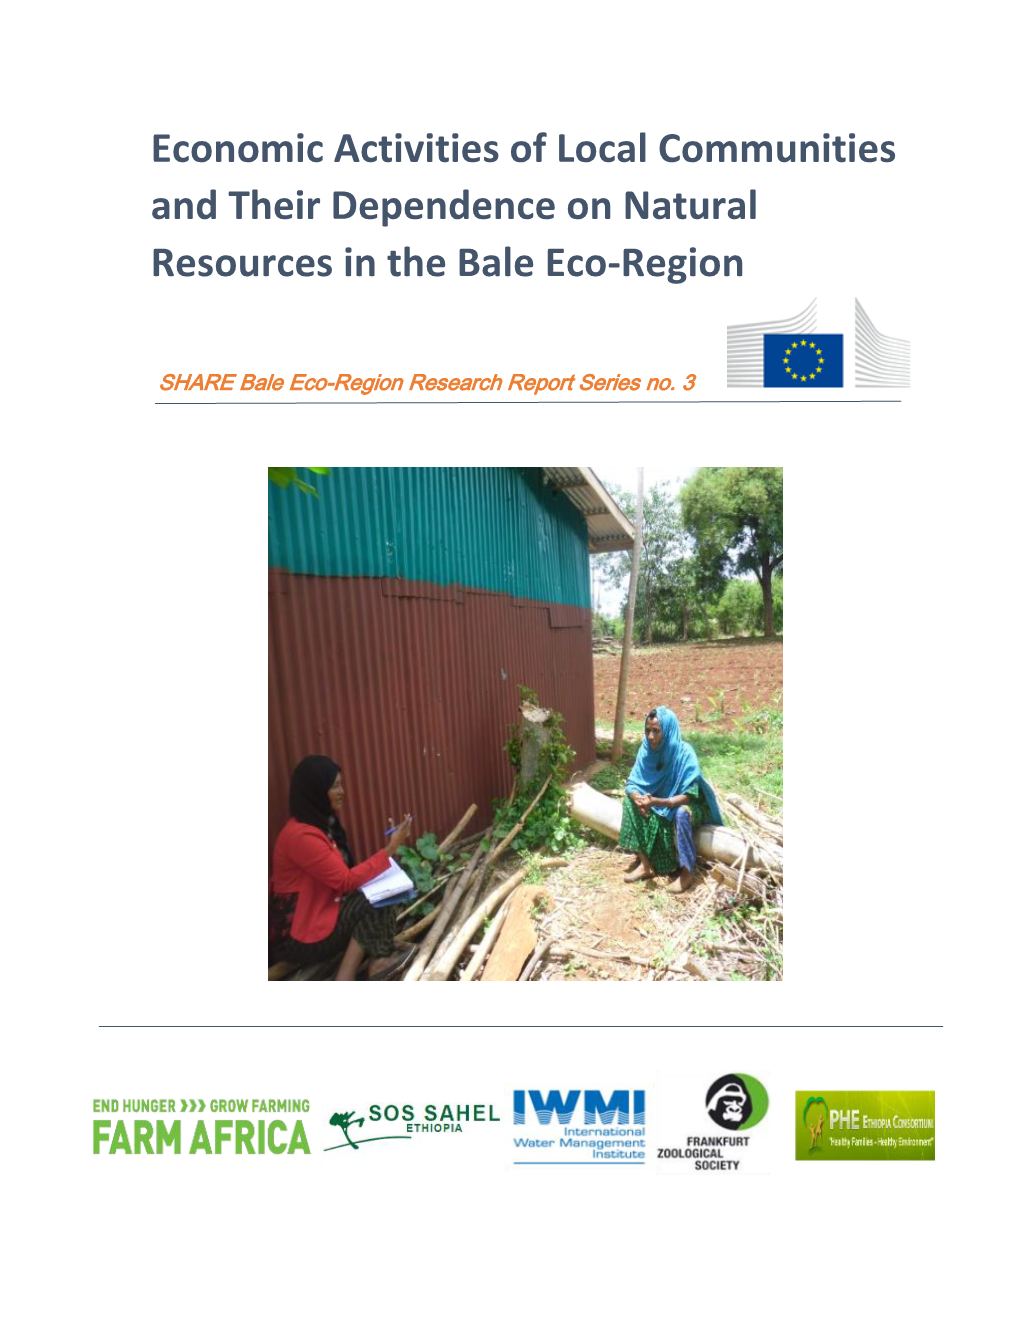 Economic Activities of Local Communities and Their Dependence on Natural Resources in the Bale Eco-Region